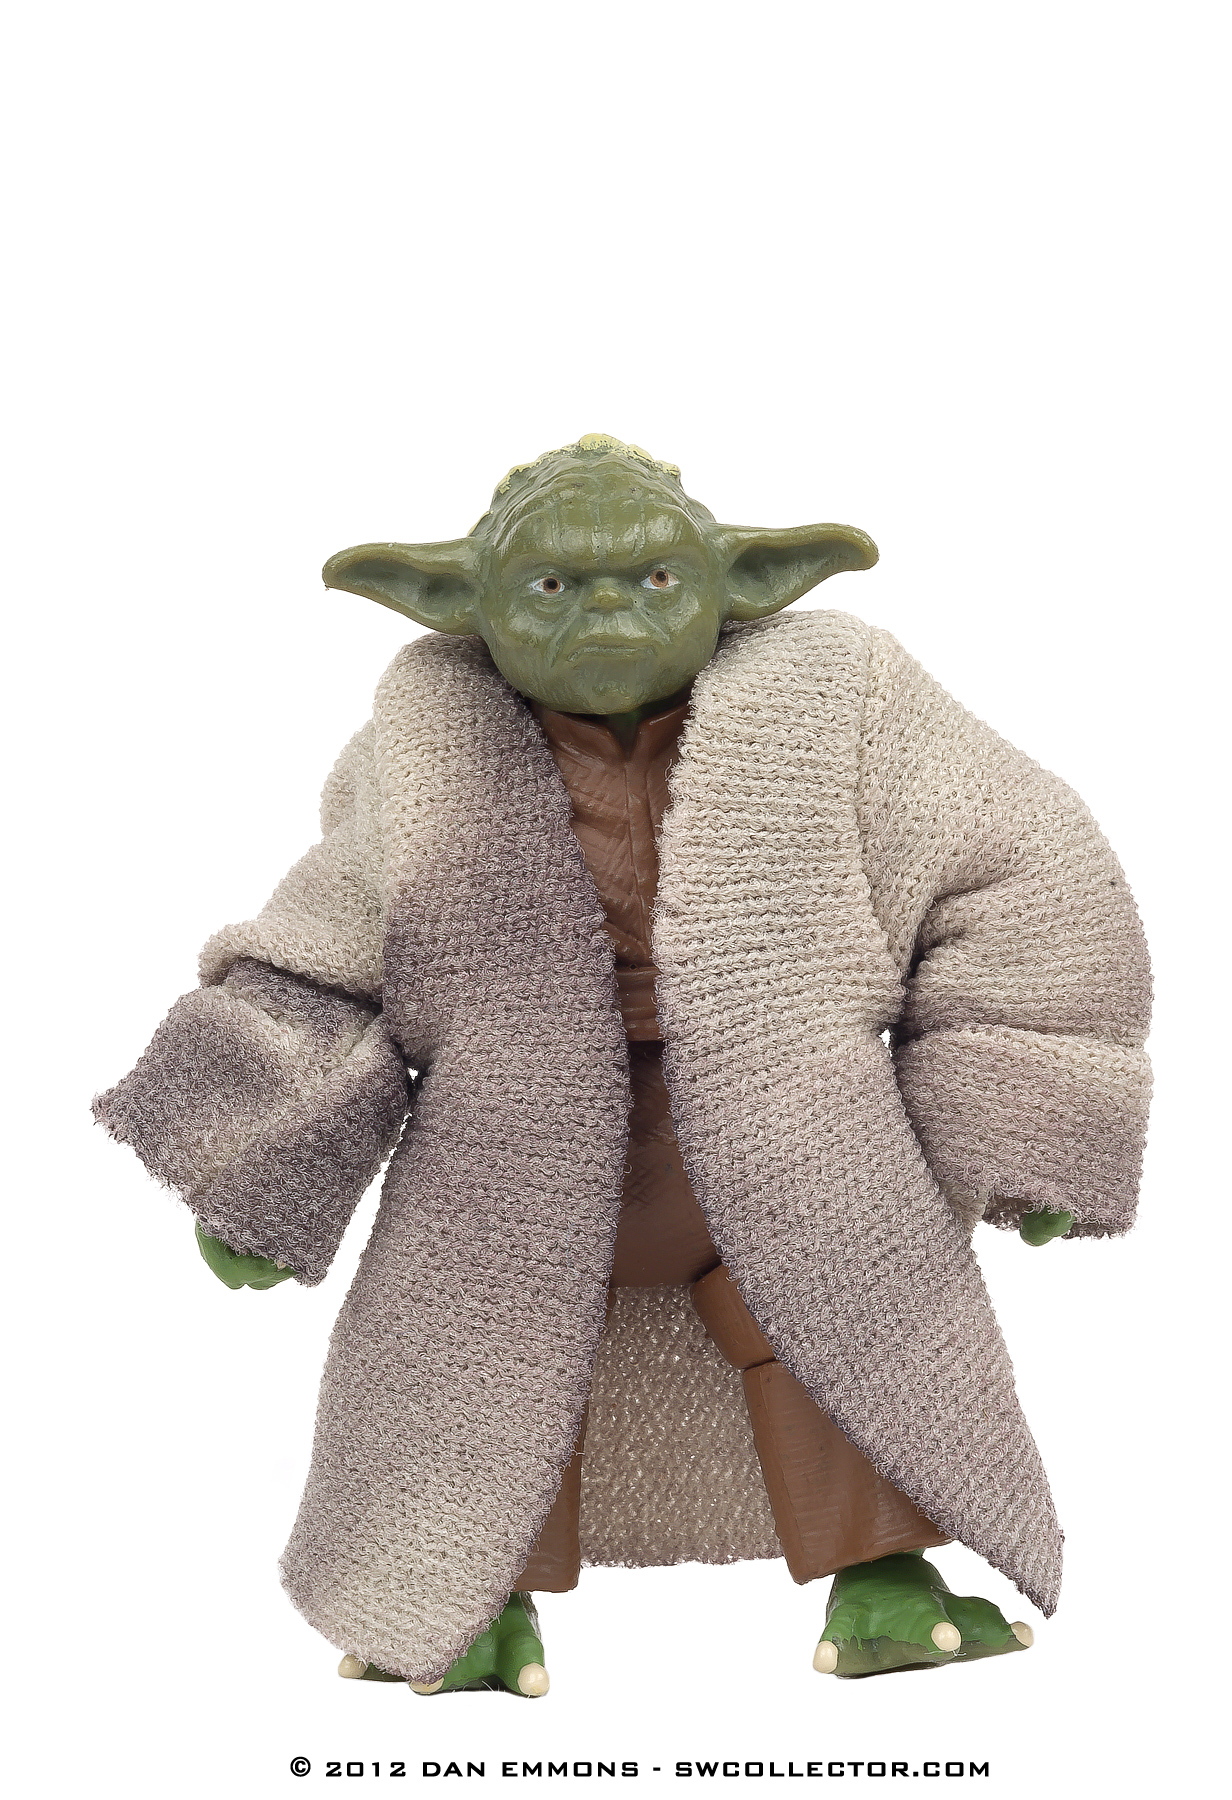 The Vintage Collection - VC20: Yoda - Variation - Dirty Cloak